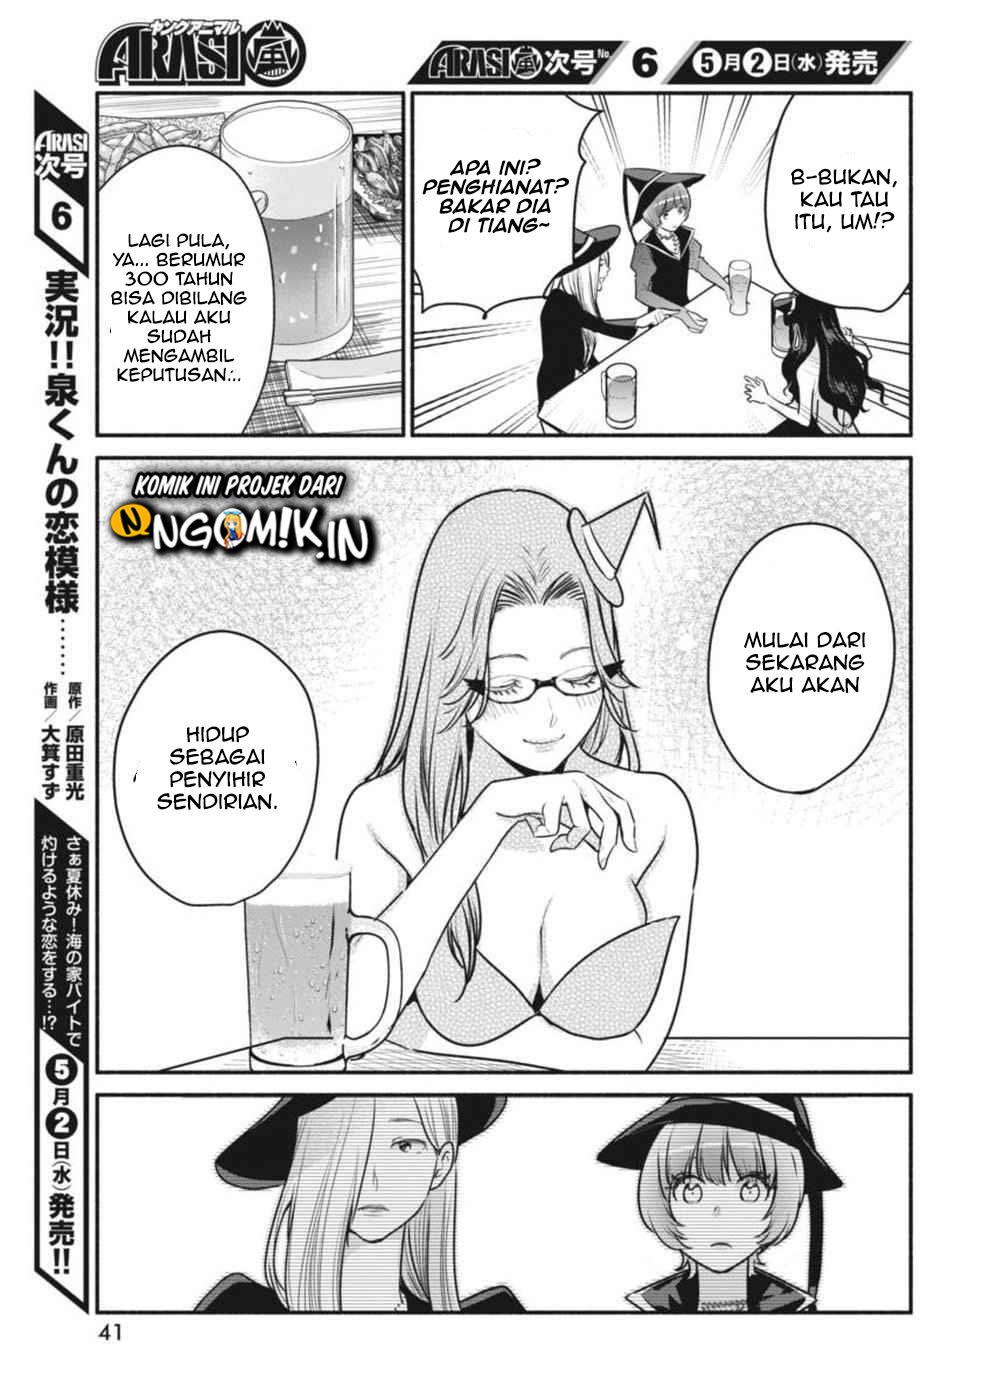 The Life of the Witch Who Remains Single for About 300 Years! Chapter 04